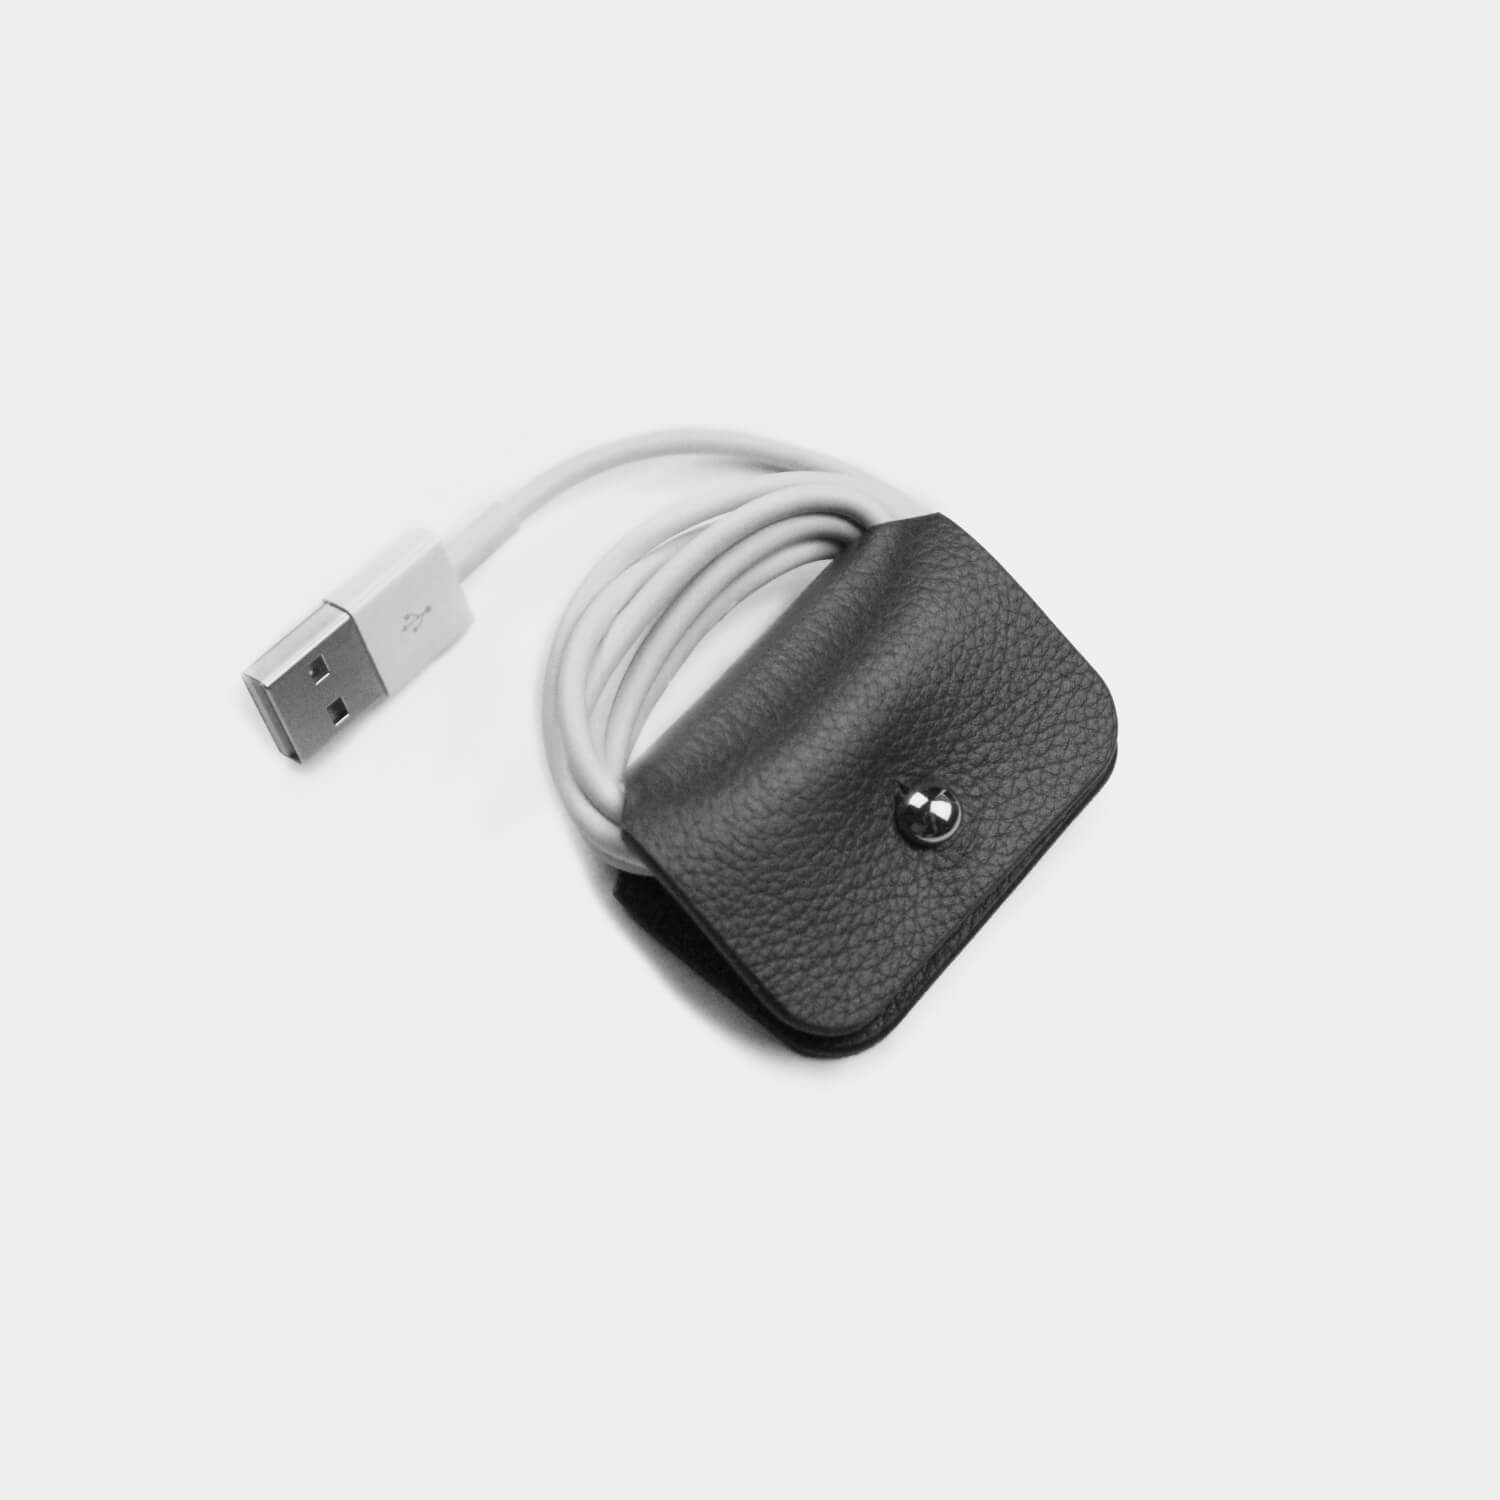 Fine grain leather rectangular cable tidy to store cables and headphones, branded with your company logo